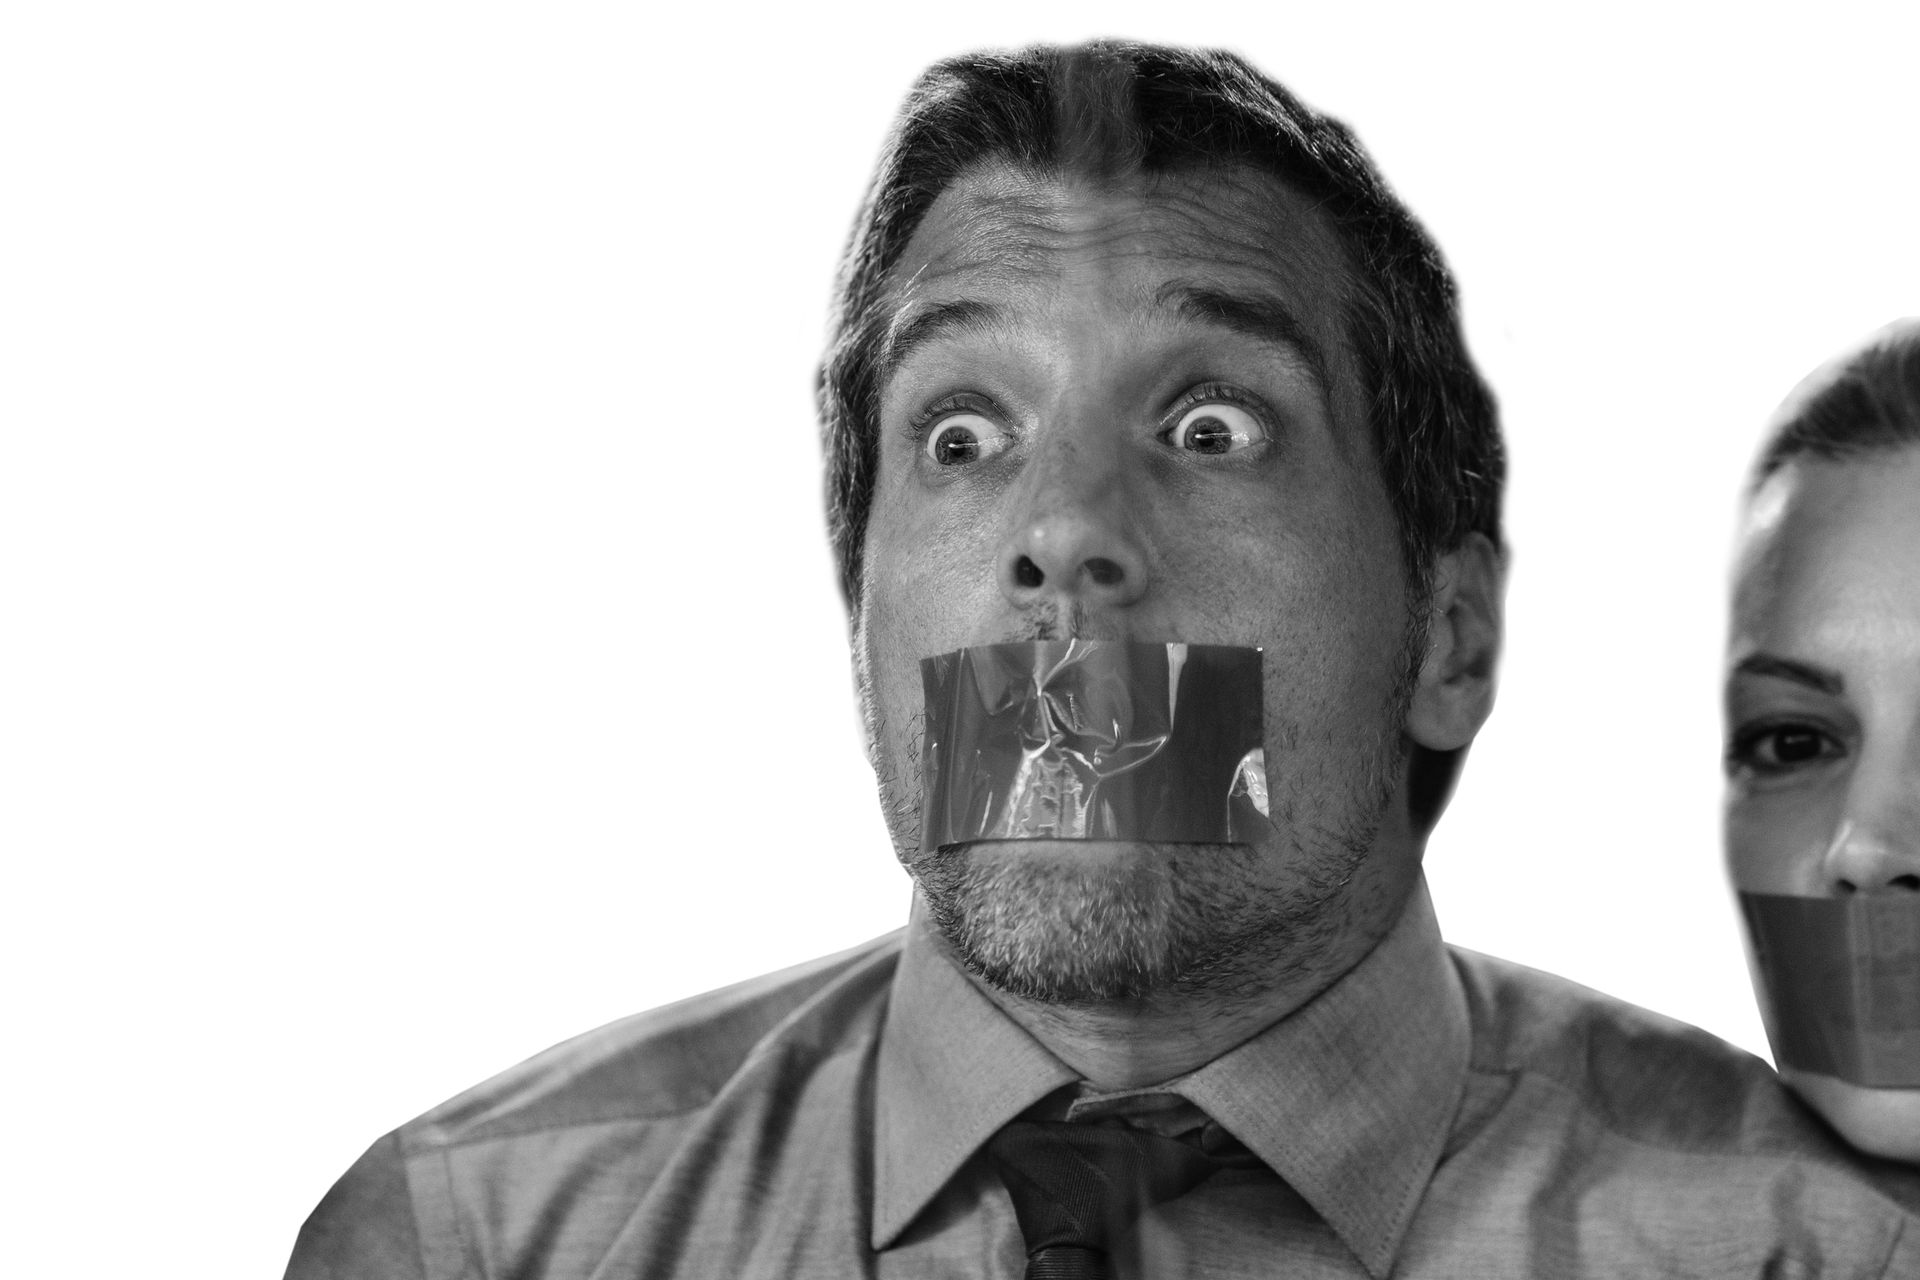 Man with tape on mouth